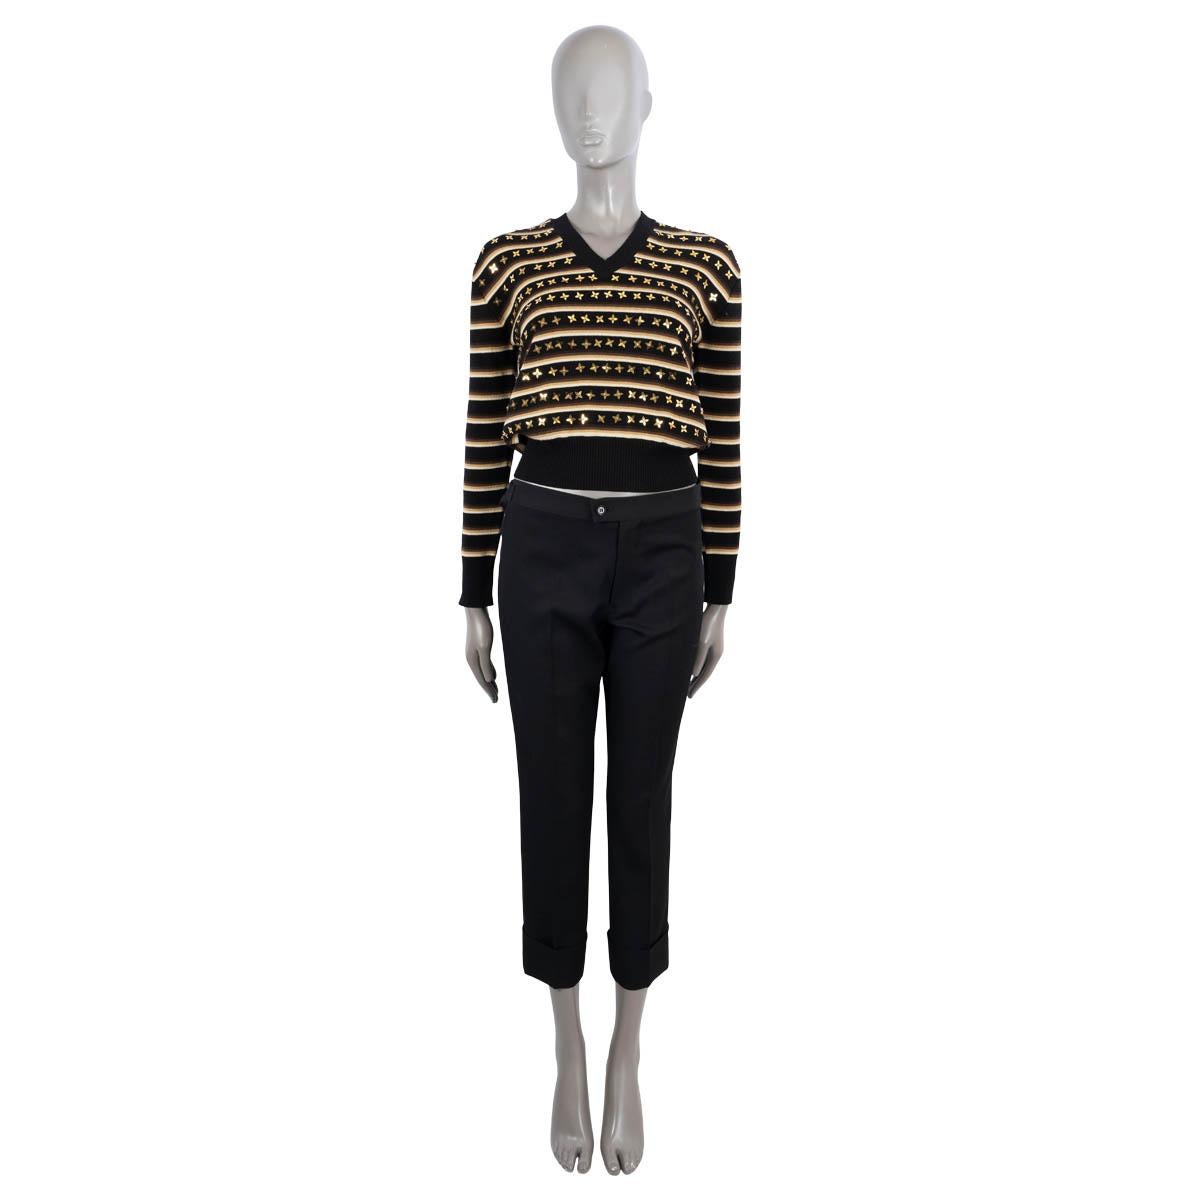 100% authentic Louis Vuitton star striped sweater in black wool (94%), polyamide (4%) and elastane (2%) with details in ivory, beige and browns. Features metallic gold Fleur de Lis sequins, a V-neck and ribbed cuffs and hem. Has been worn and is in